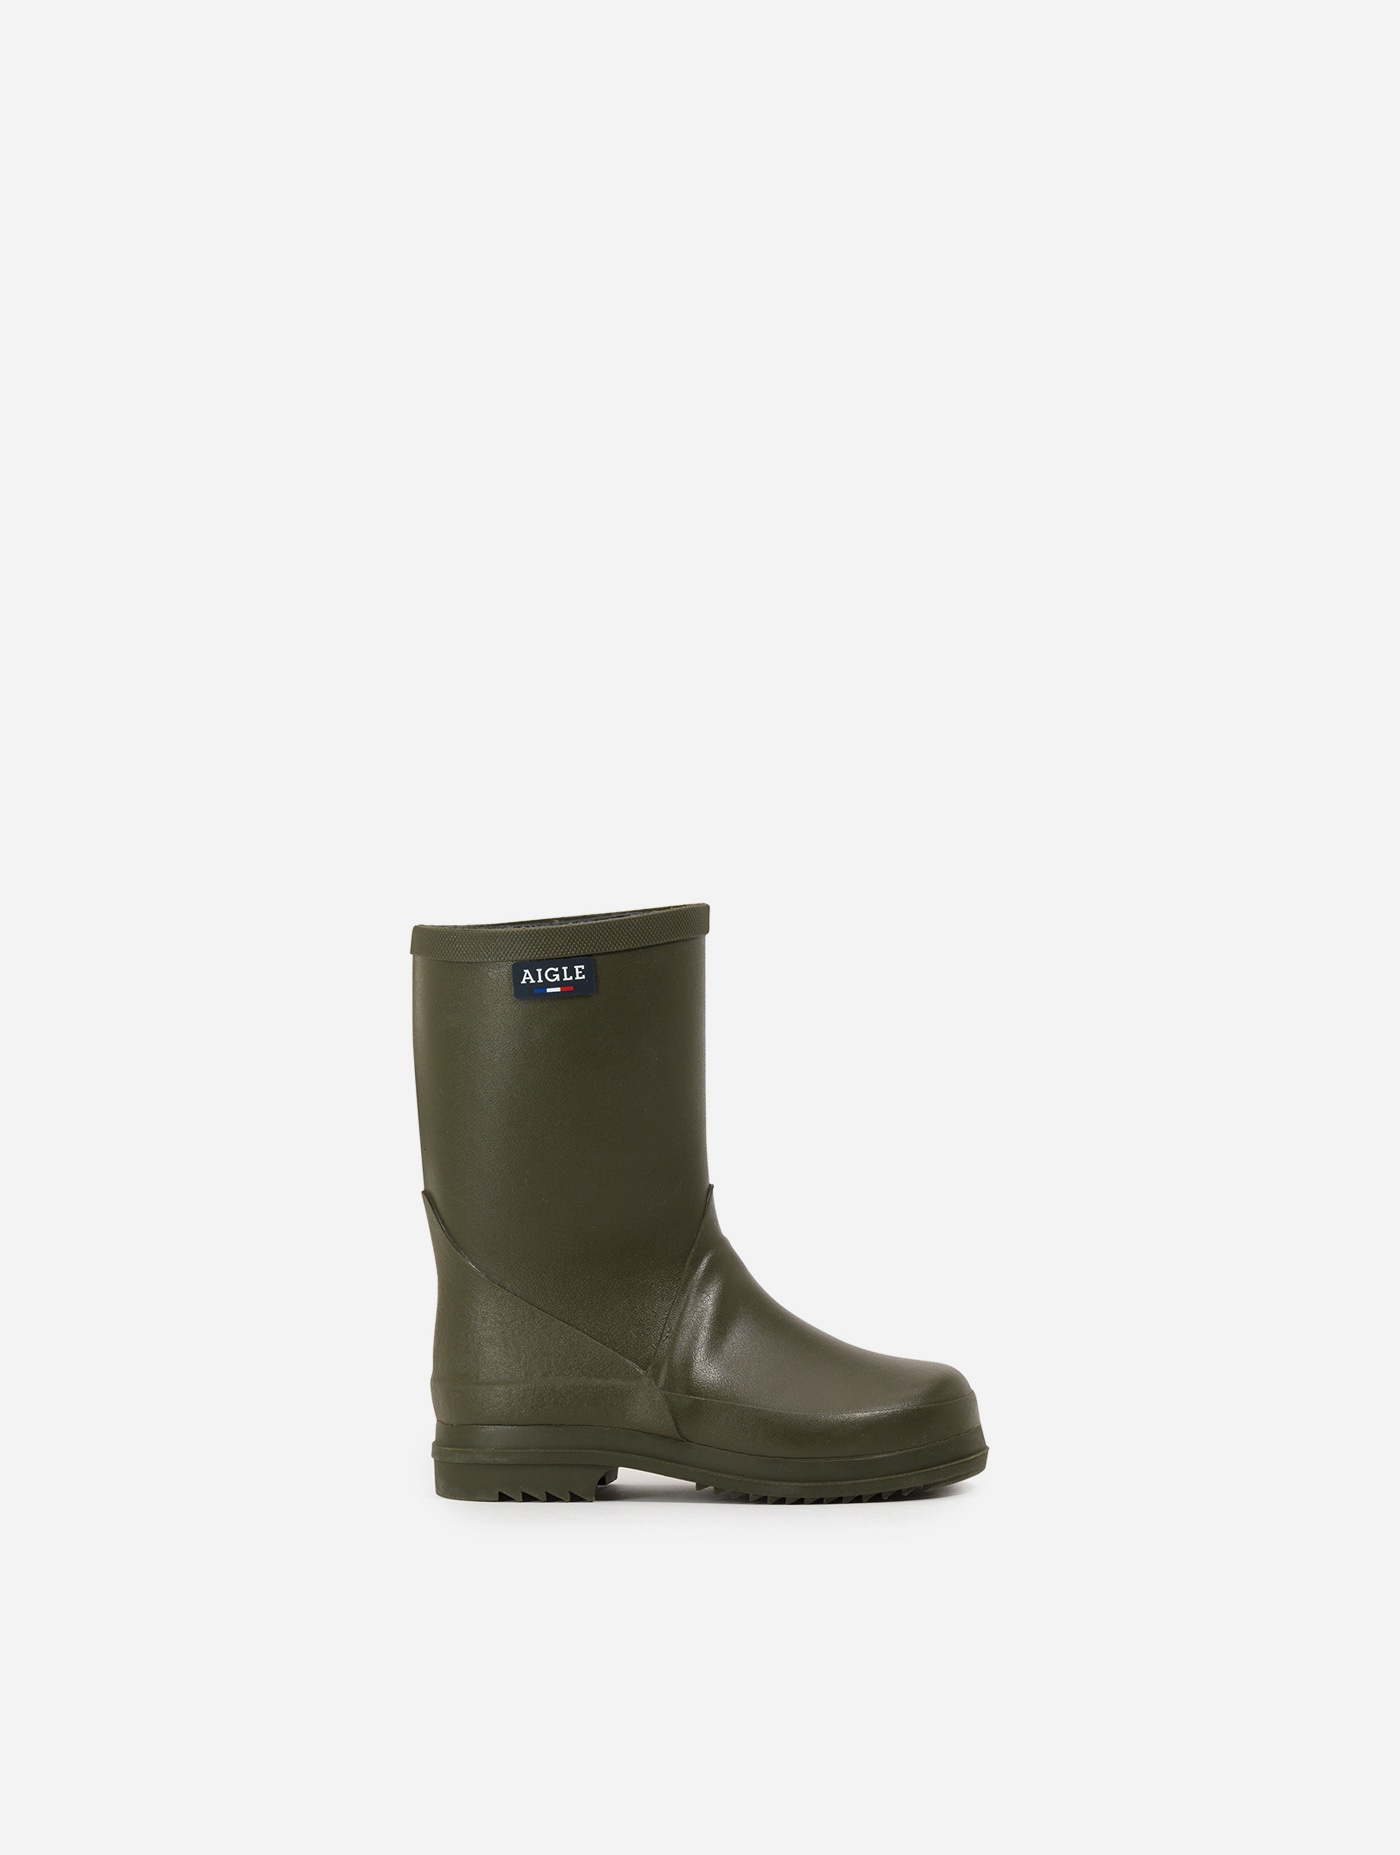 symmetri to uger identifikation Aigle - The children's rain boot, Made in France Kaki - French lolly | AIGLE